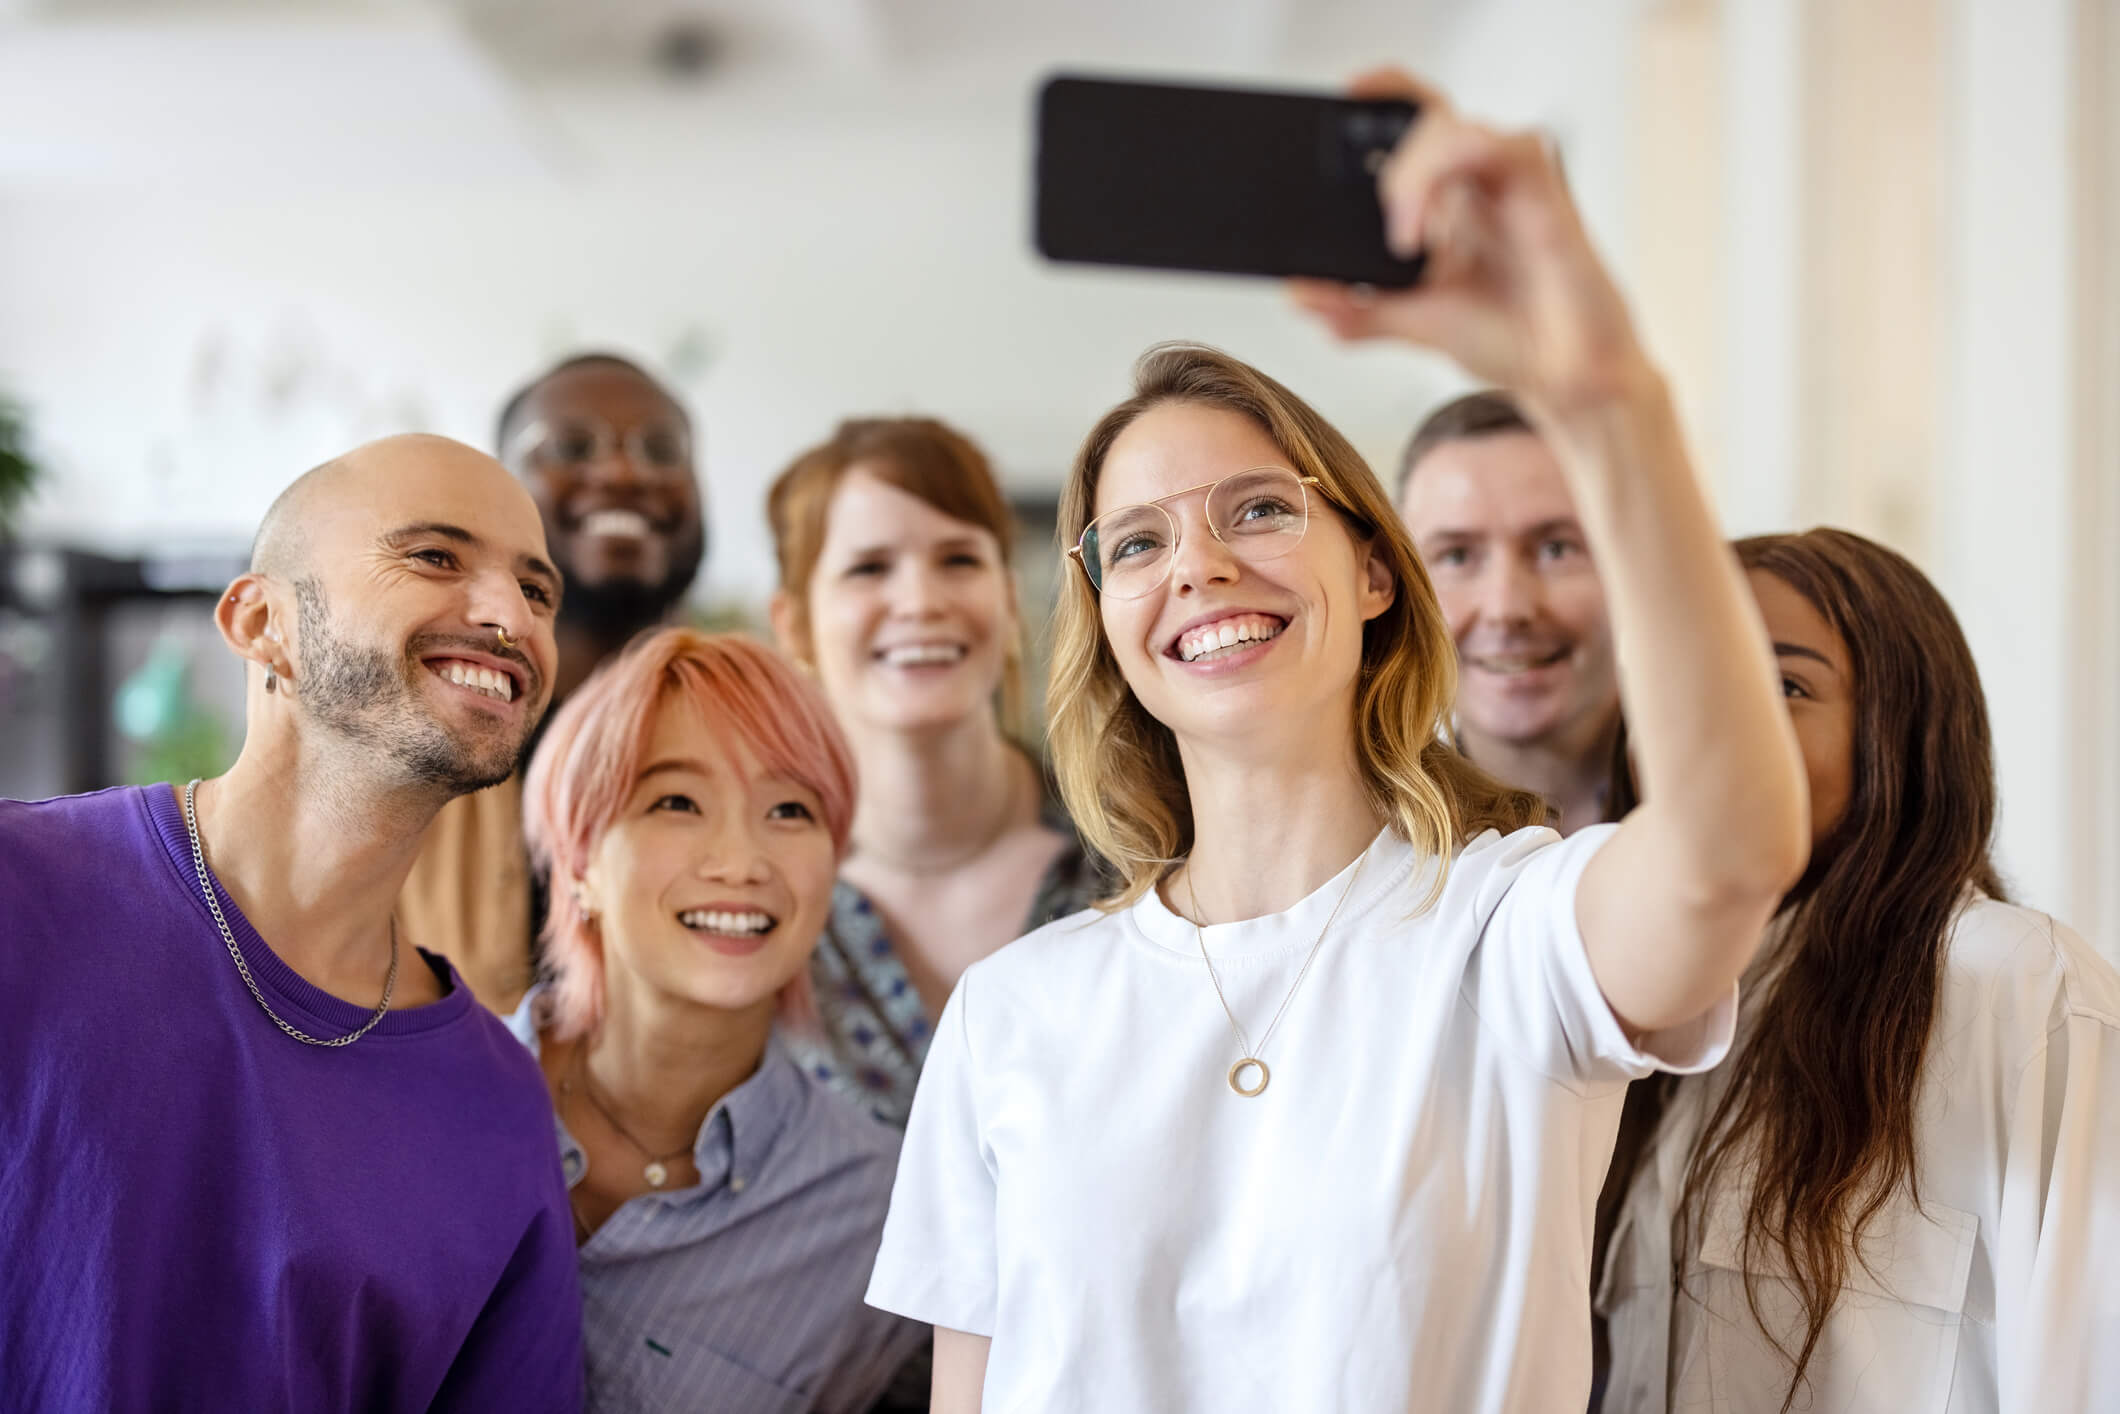 A group of friends are standing up in a room together and taking a selfie; one person is holding the phone up to take a picture, and everyone is smiling.